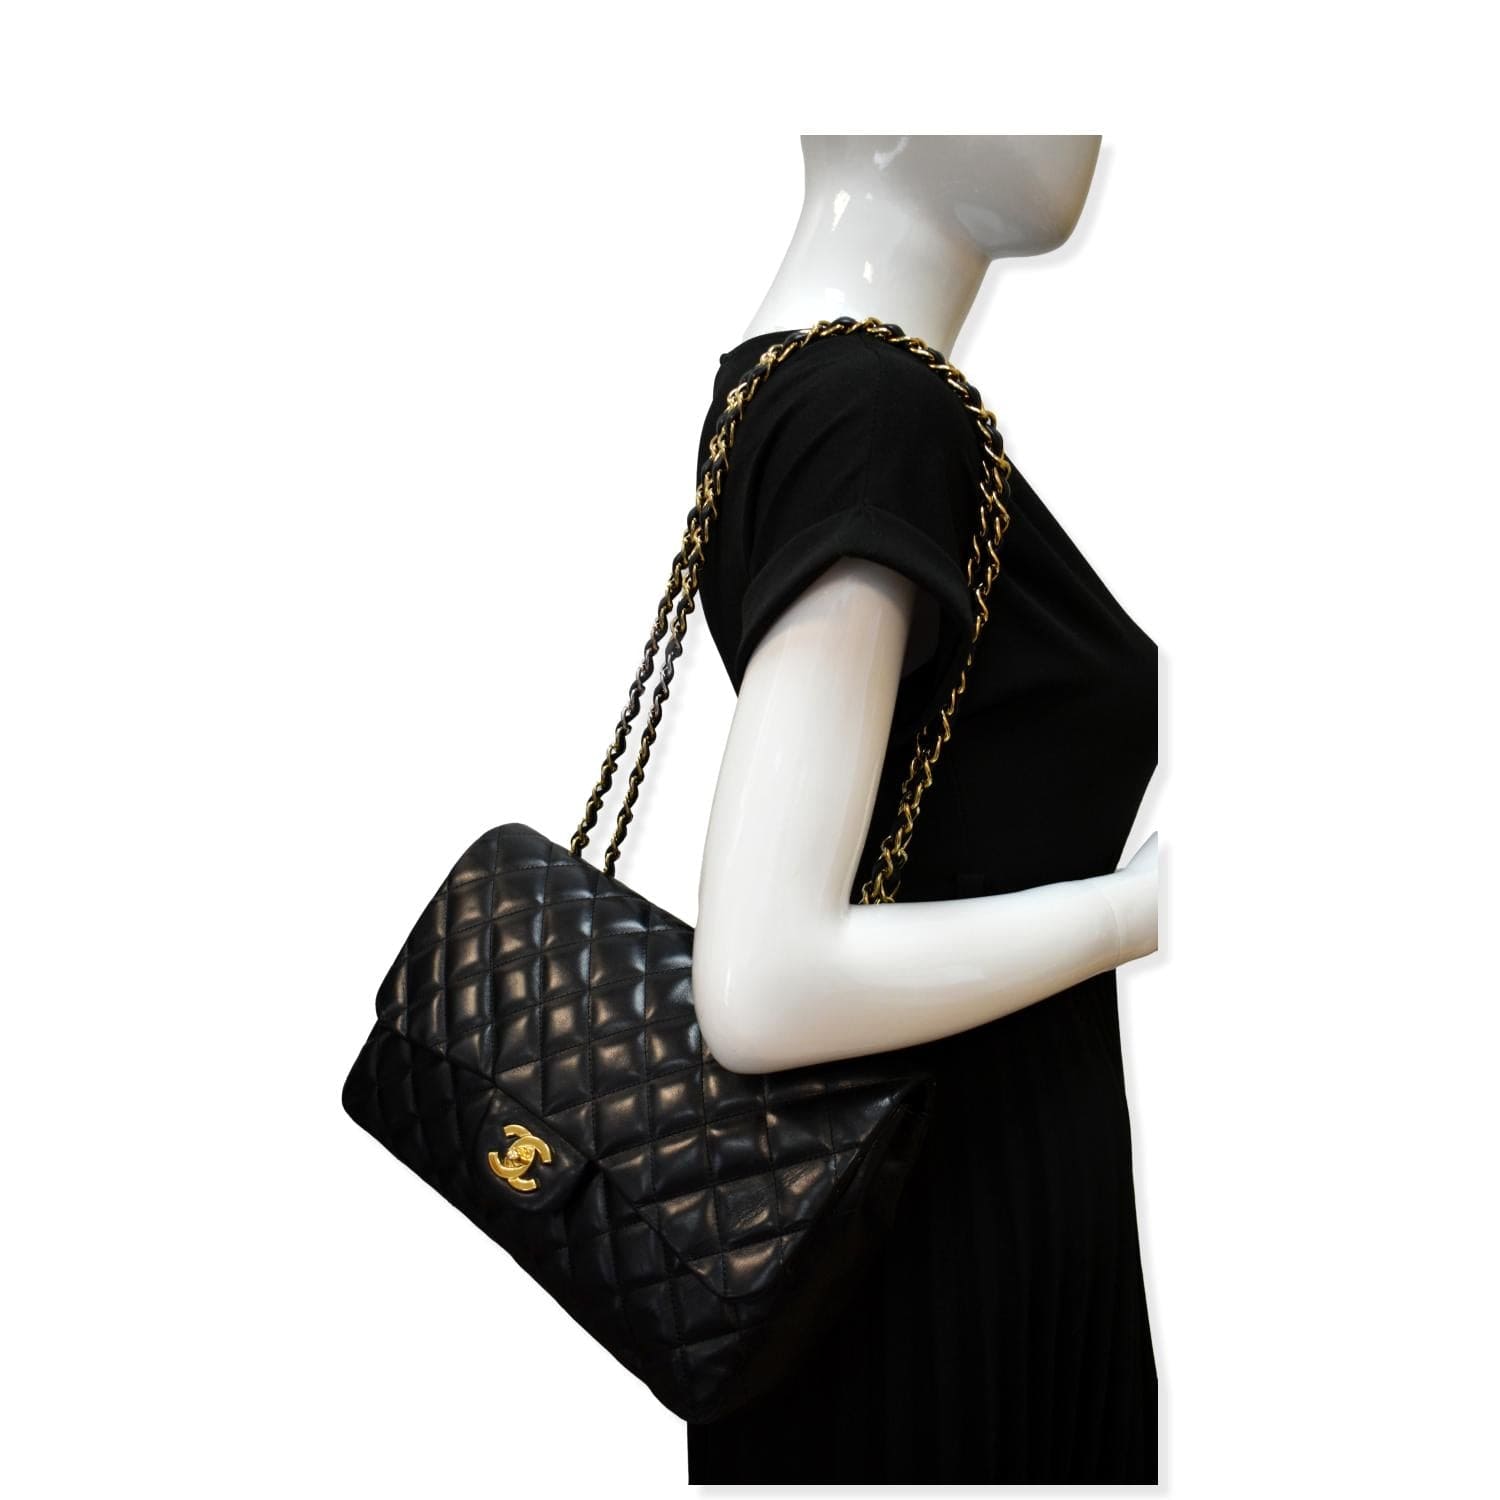 Chanel Classic Single Flap Bag in Black Quilted Lambskin Medium